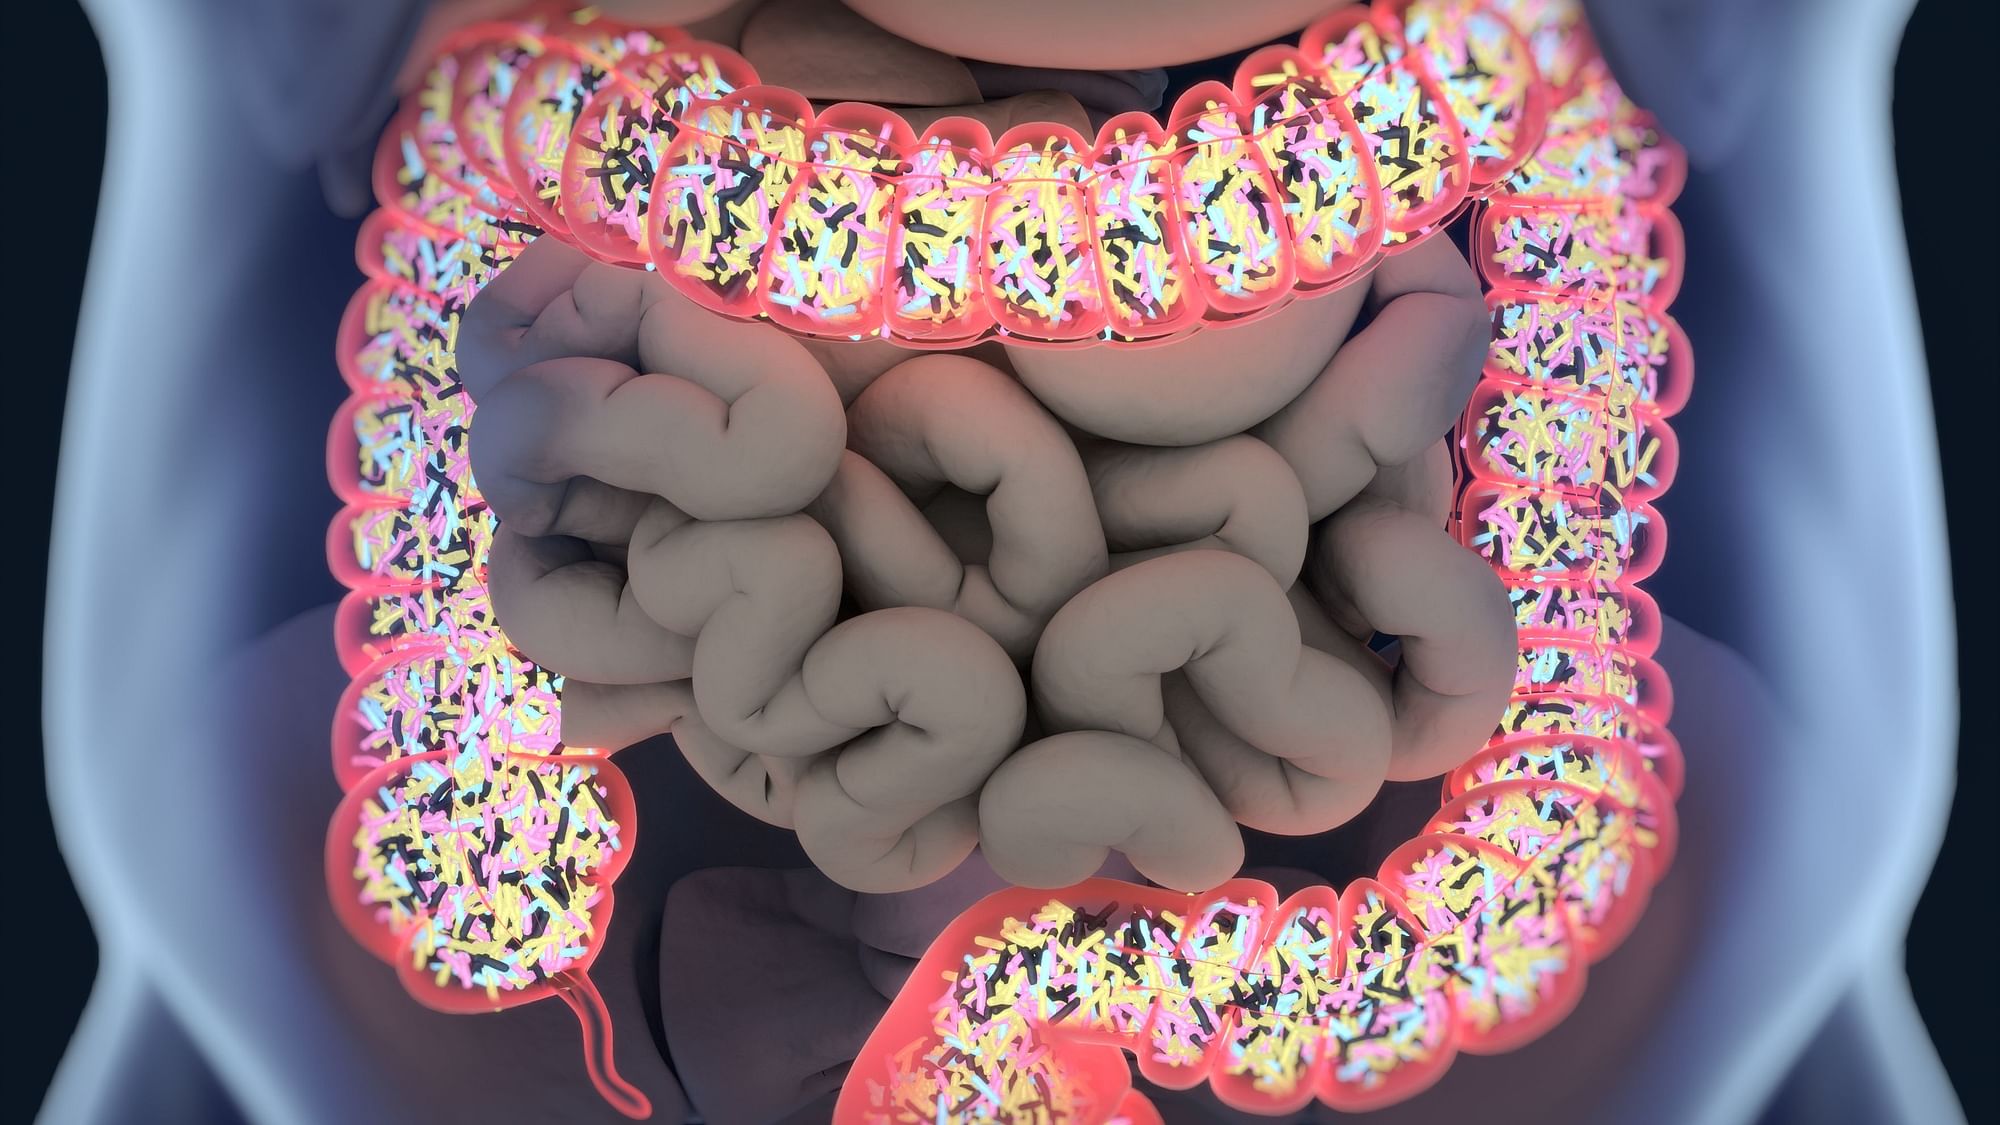 Researchers have identified almost 2,000 unknown bacterial species in the human gut.